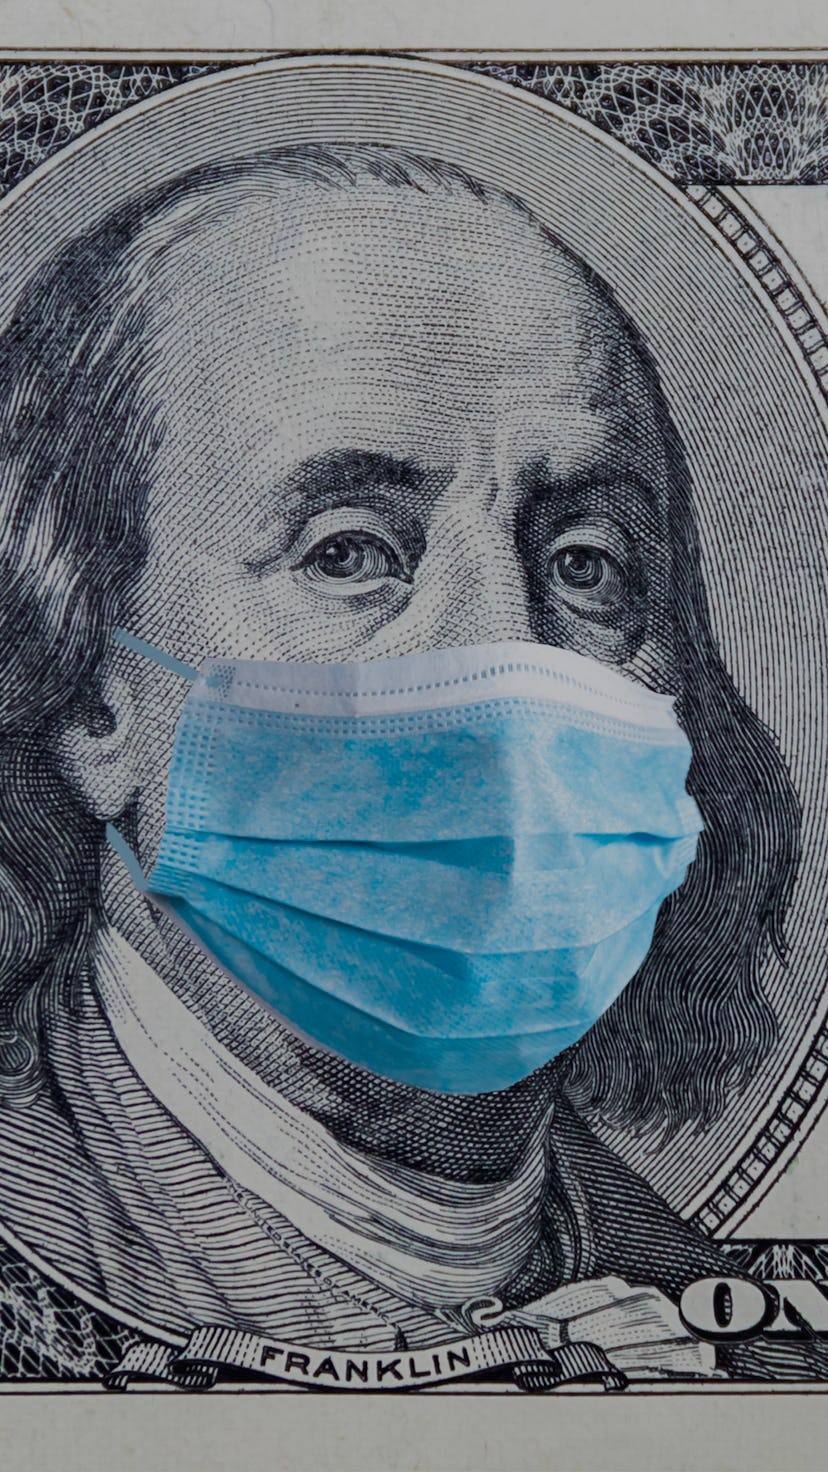 Coronavirus Wuhan. US quarantine, 100 dollar banknote with medical mask. The concept of epidemic and...